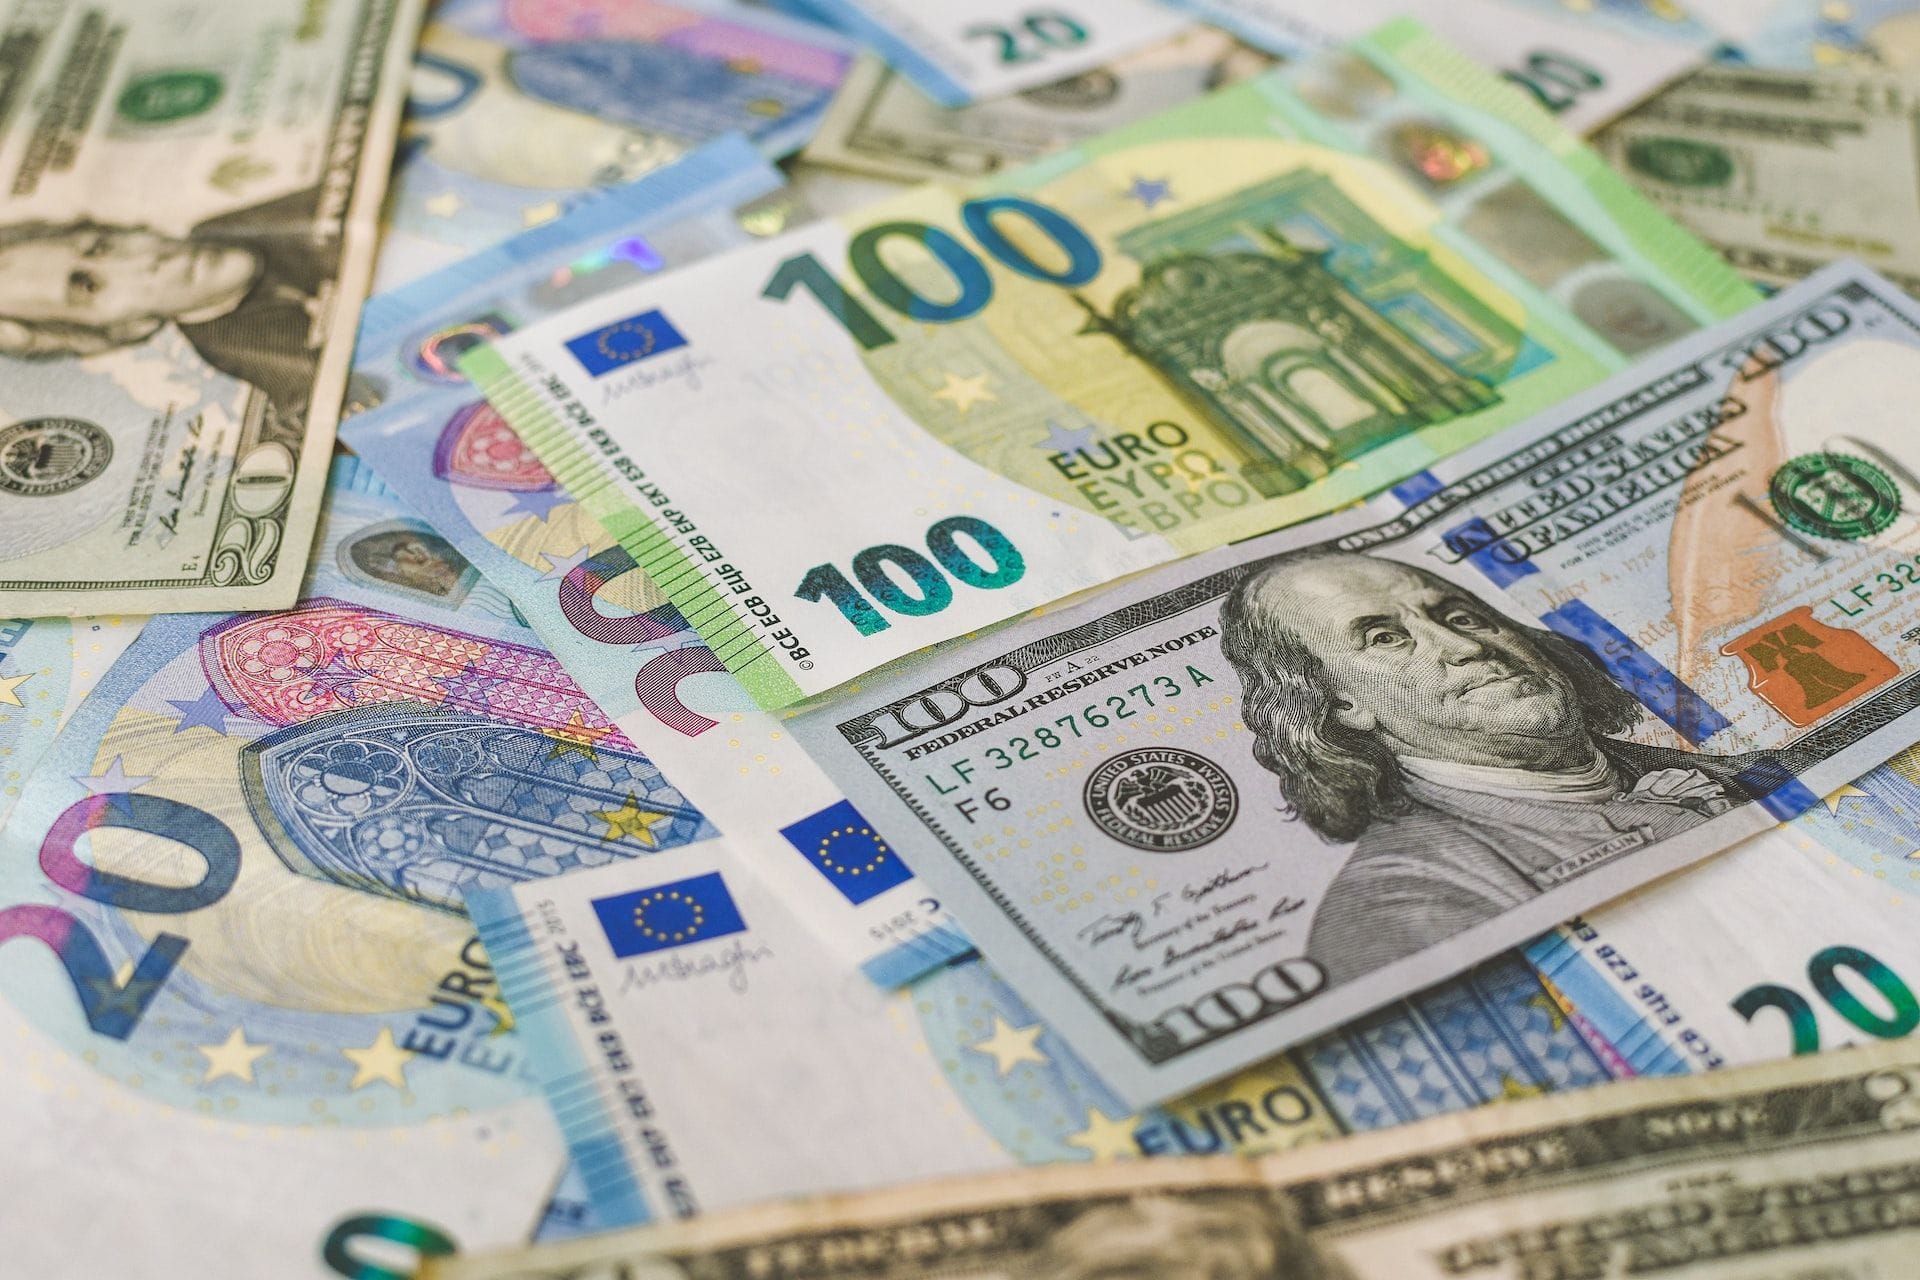 Send Payments wraps up oversubscribed $11.5m Series B raise as Europe beckons